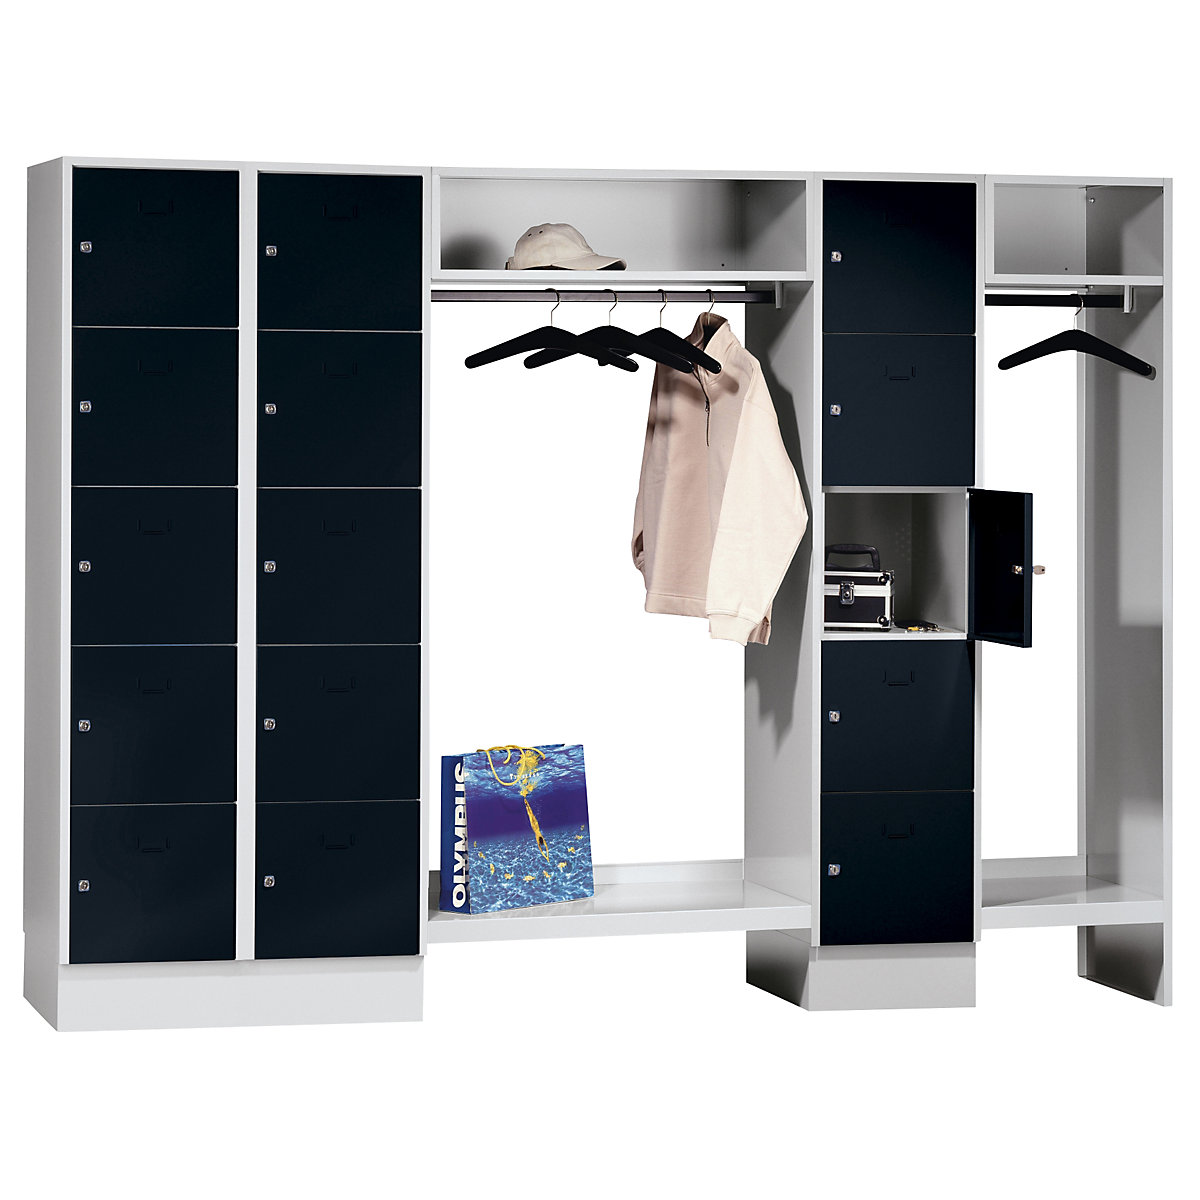 Cloakroom locker system – Wolf, 15 compartments left / centre, 15 coat hangers, overall width 2520 mm, compartment width 398 mm, jet black/light grey-2